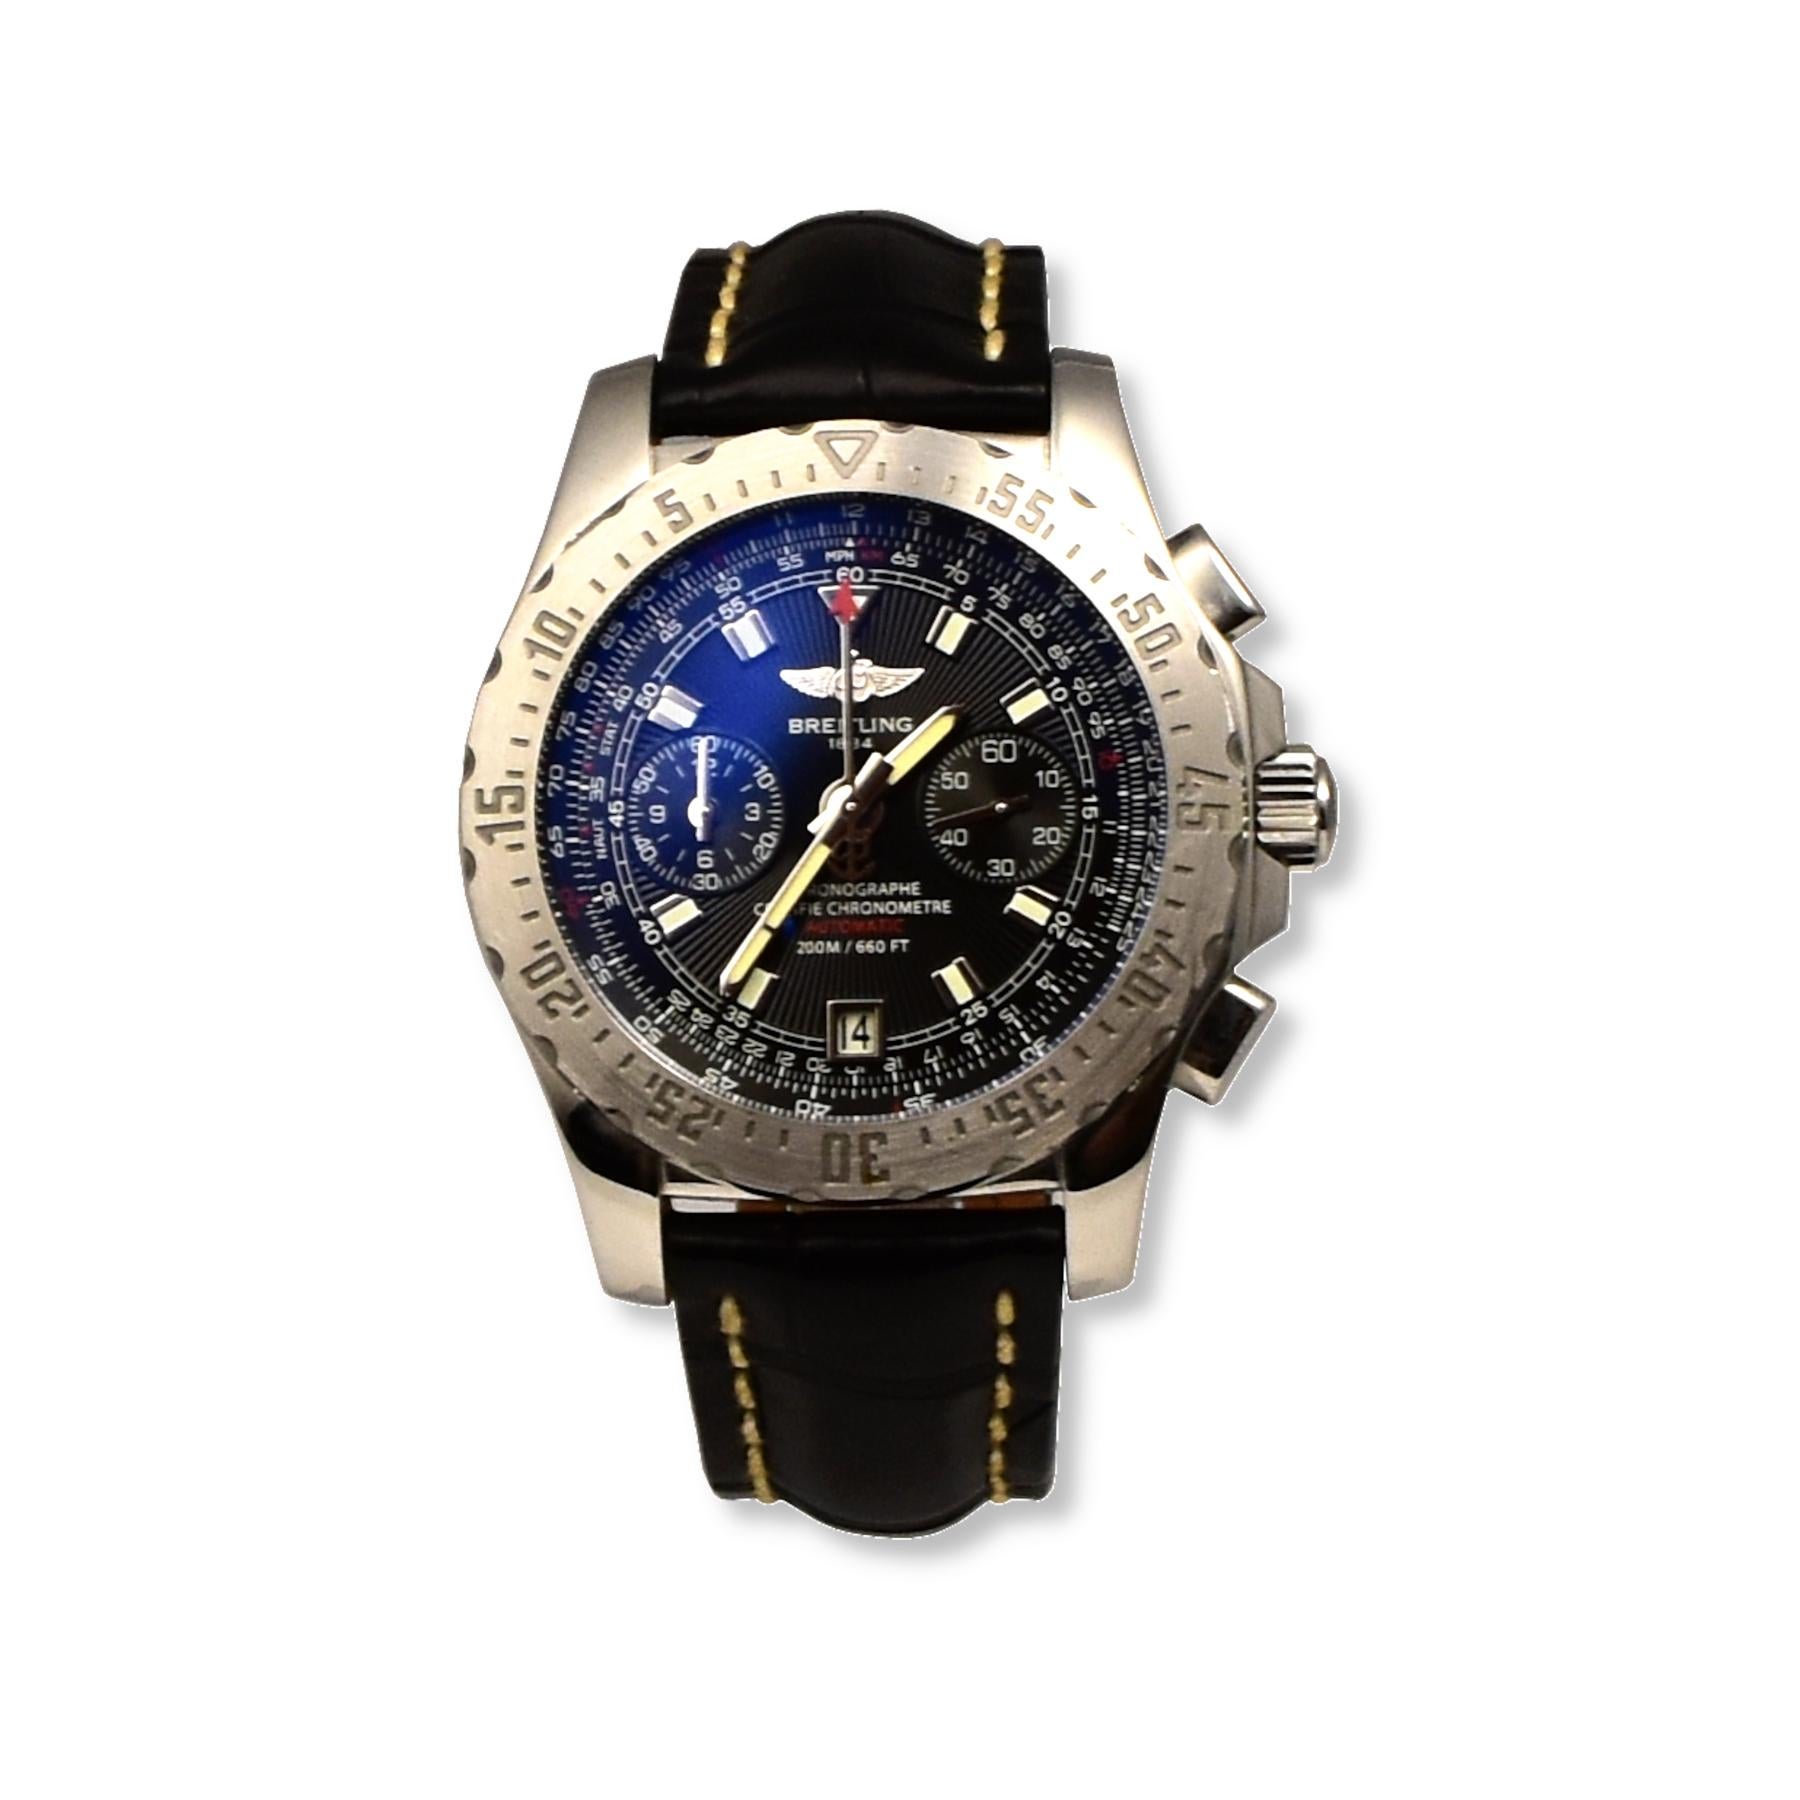 Brand: Breitling
Model: Skyracer Chronograph
Model No: A27362
Movement: Automatic
Case Material: Stainless Steel
Case Size: 44mm
Dial: Black with Chronograph
Bracelet: Leather Bracelet